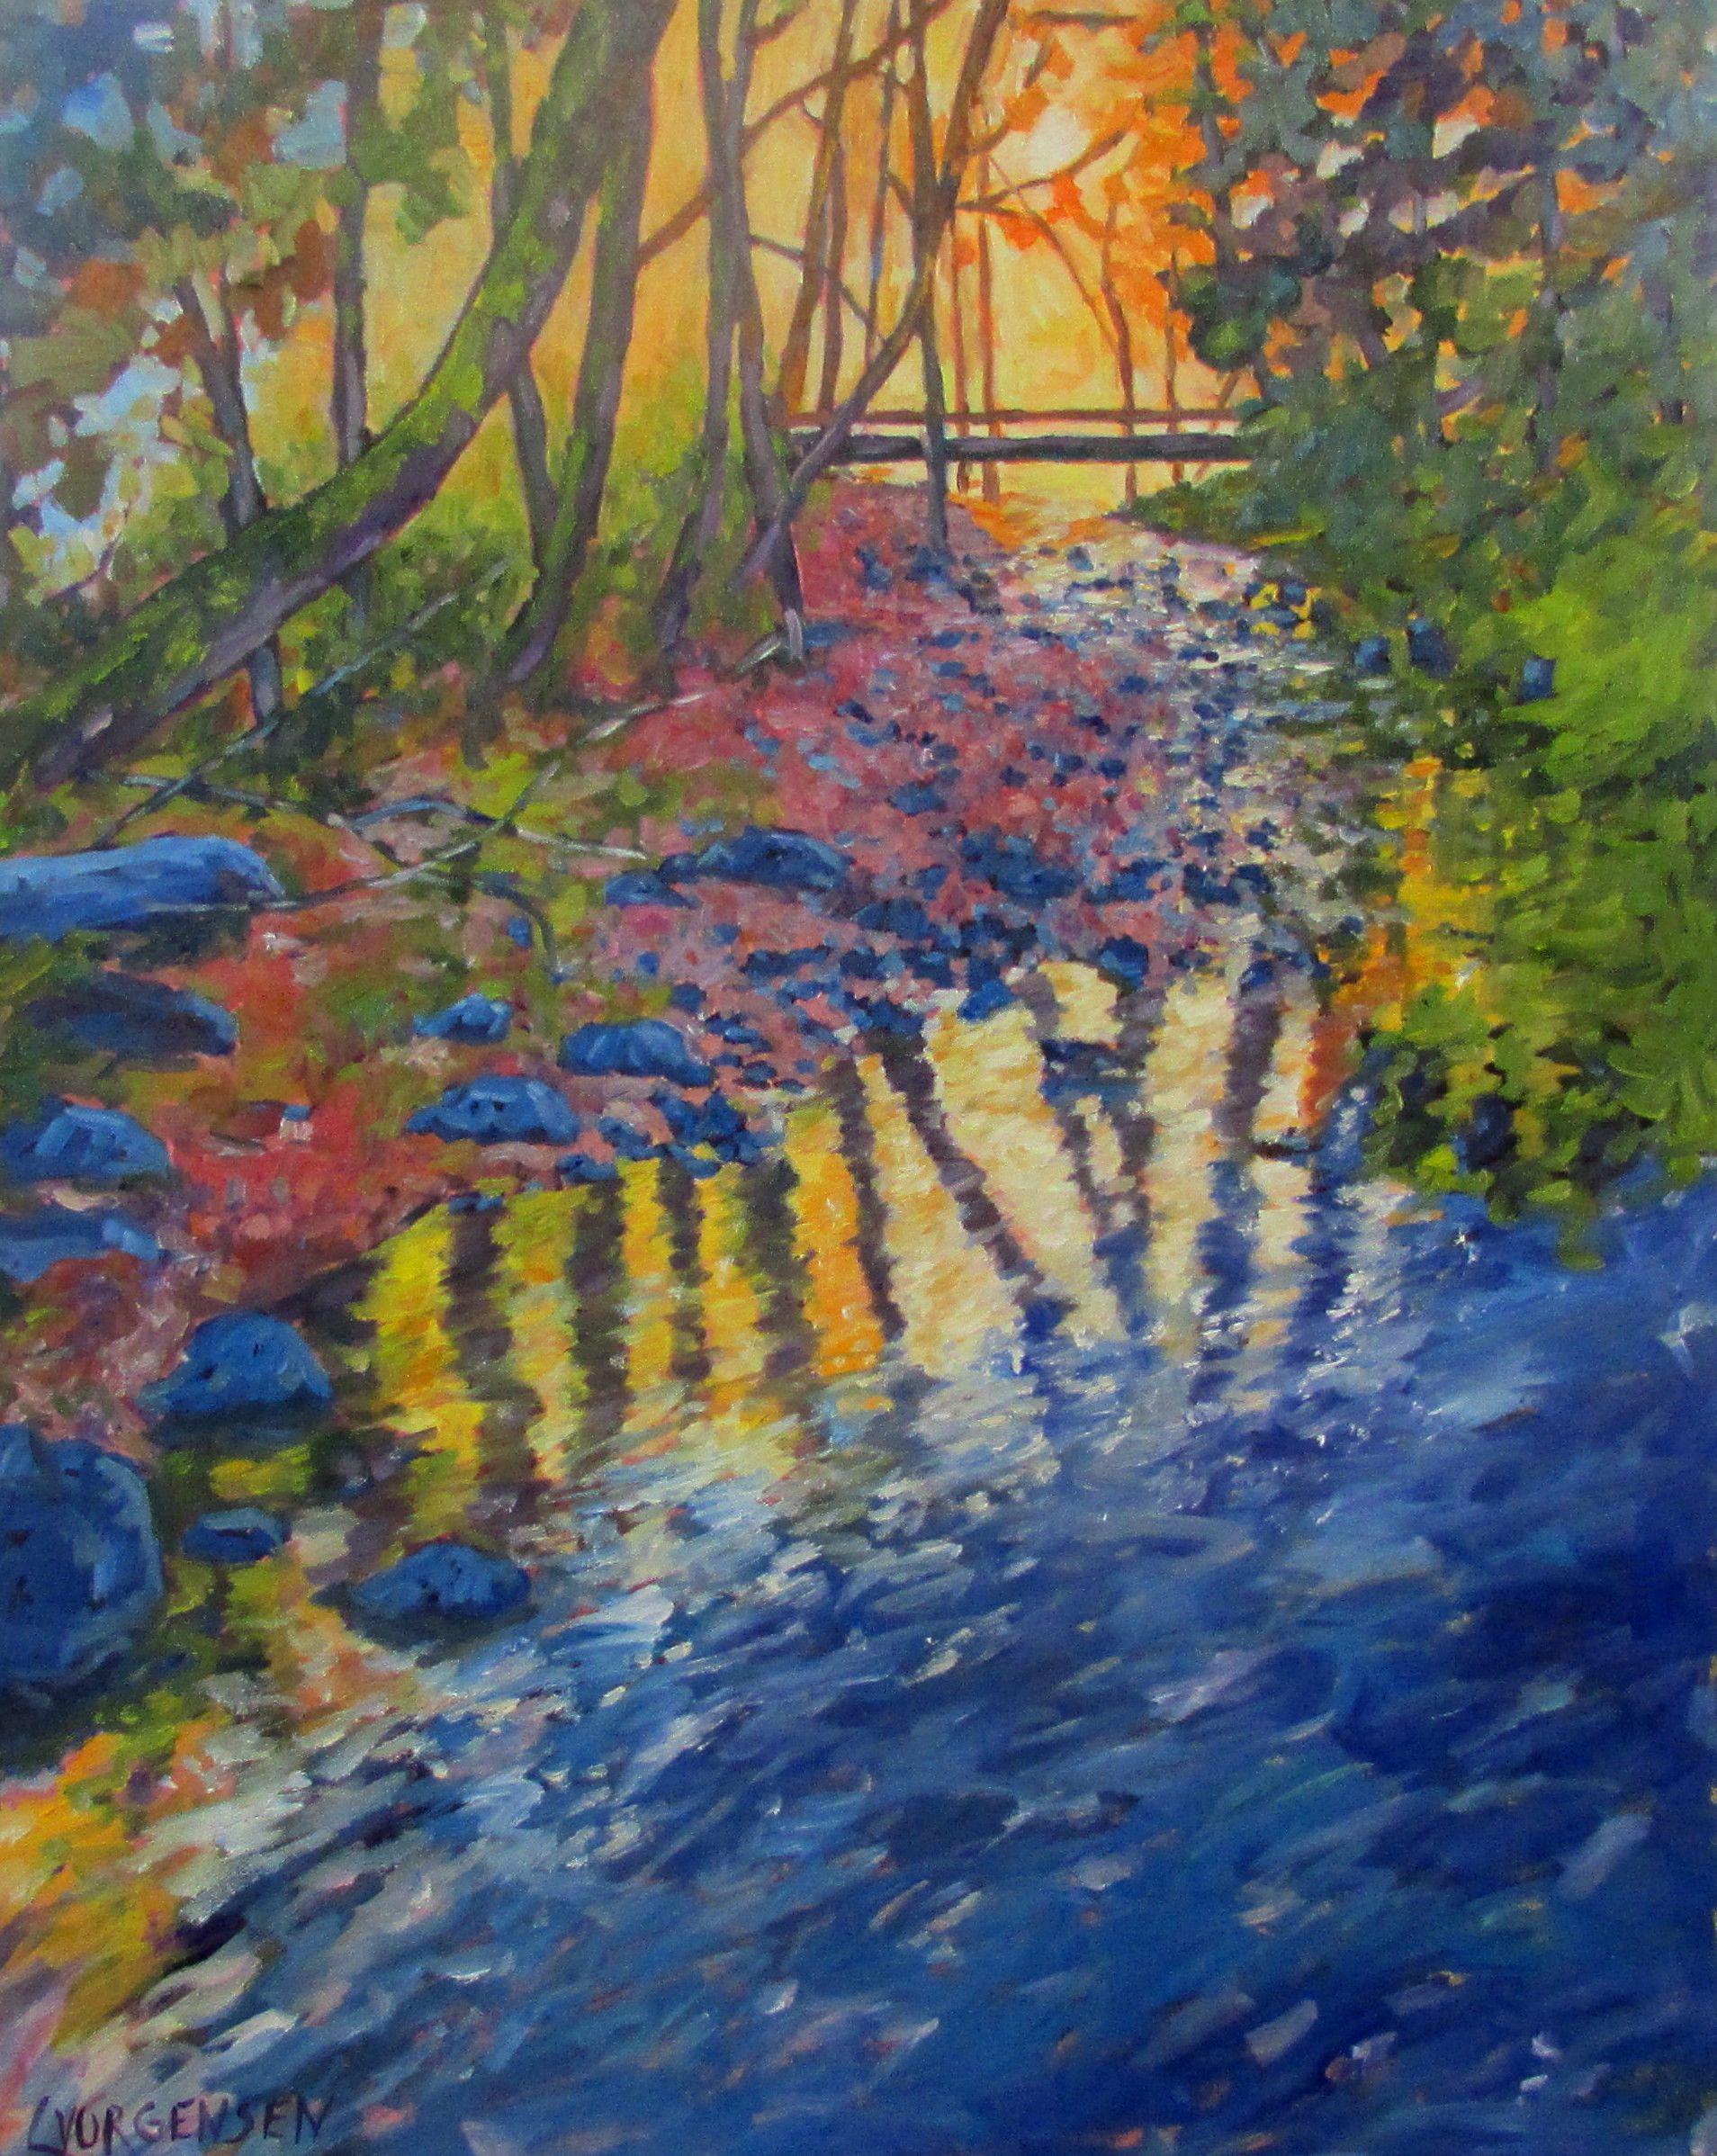 I love walking in the forest in the fall when the colors are spectacular.  I found this scene near to where I live and decided it would make a great painting and companion piece to Riverside #1.  The sides of the gallery wrapped canvas have been